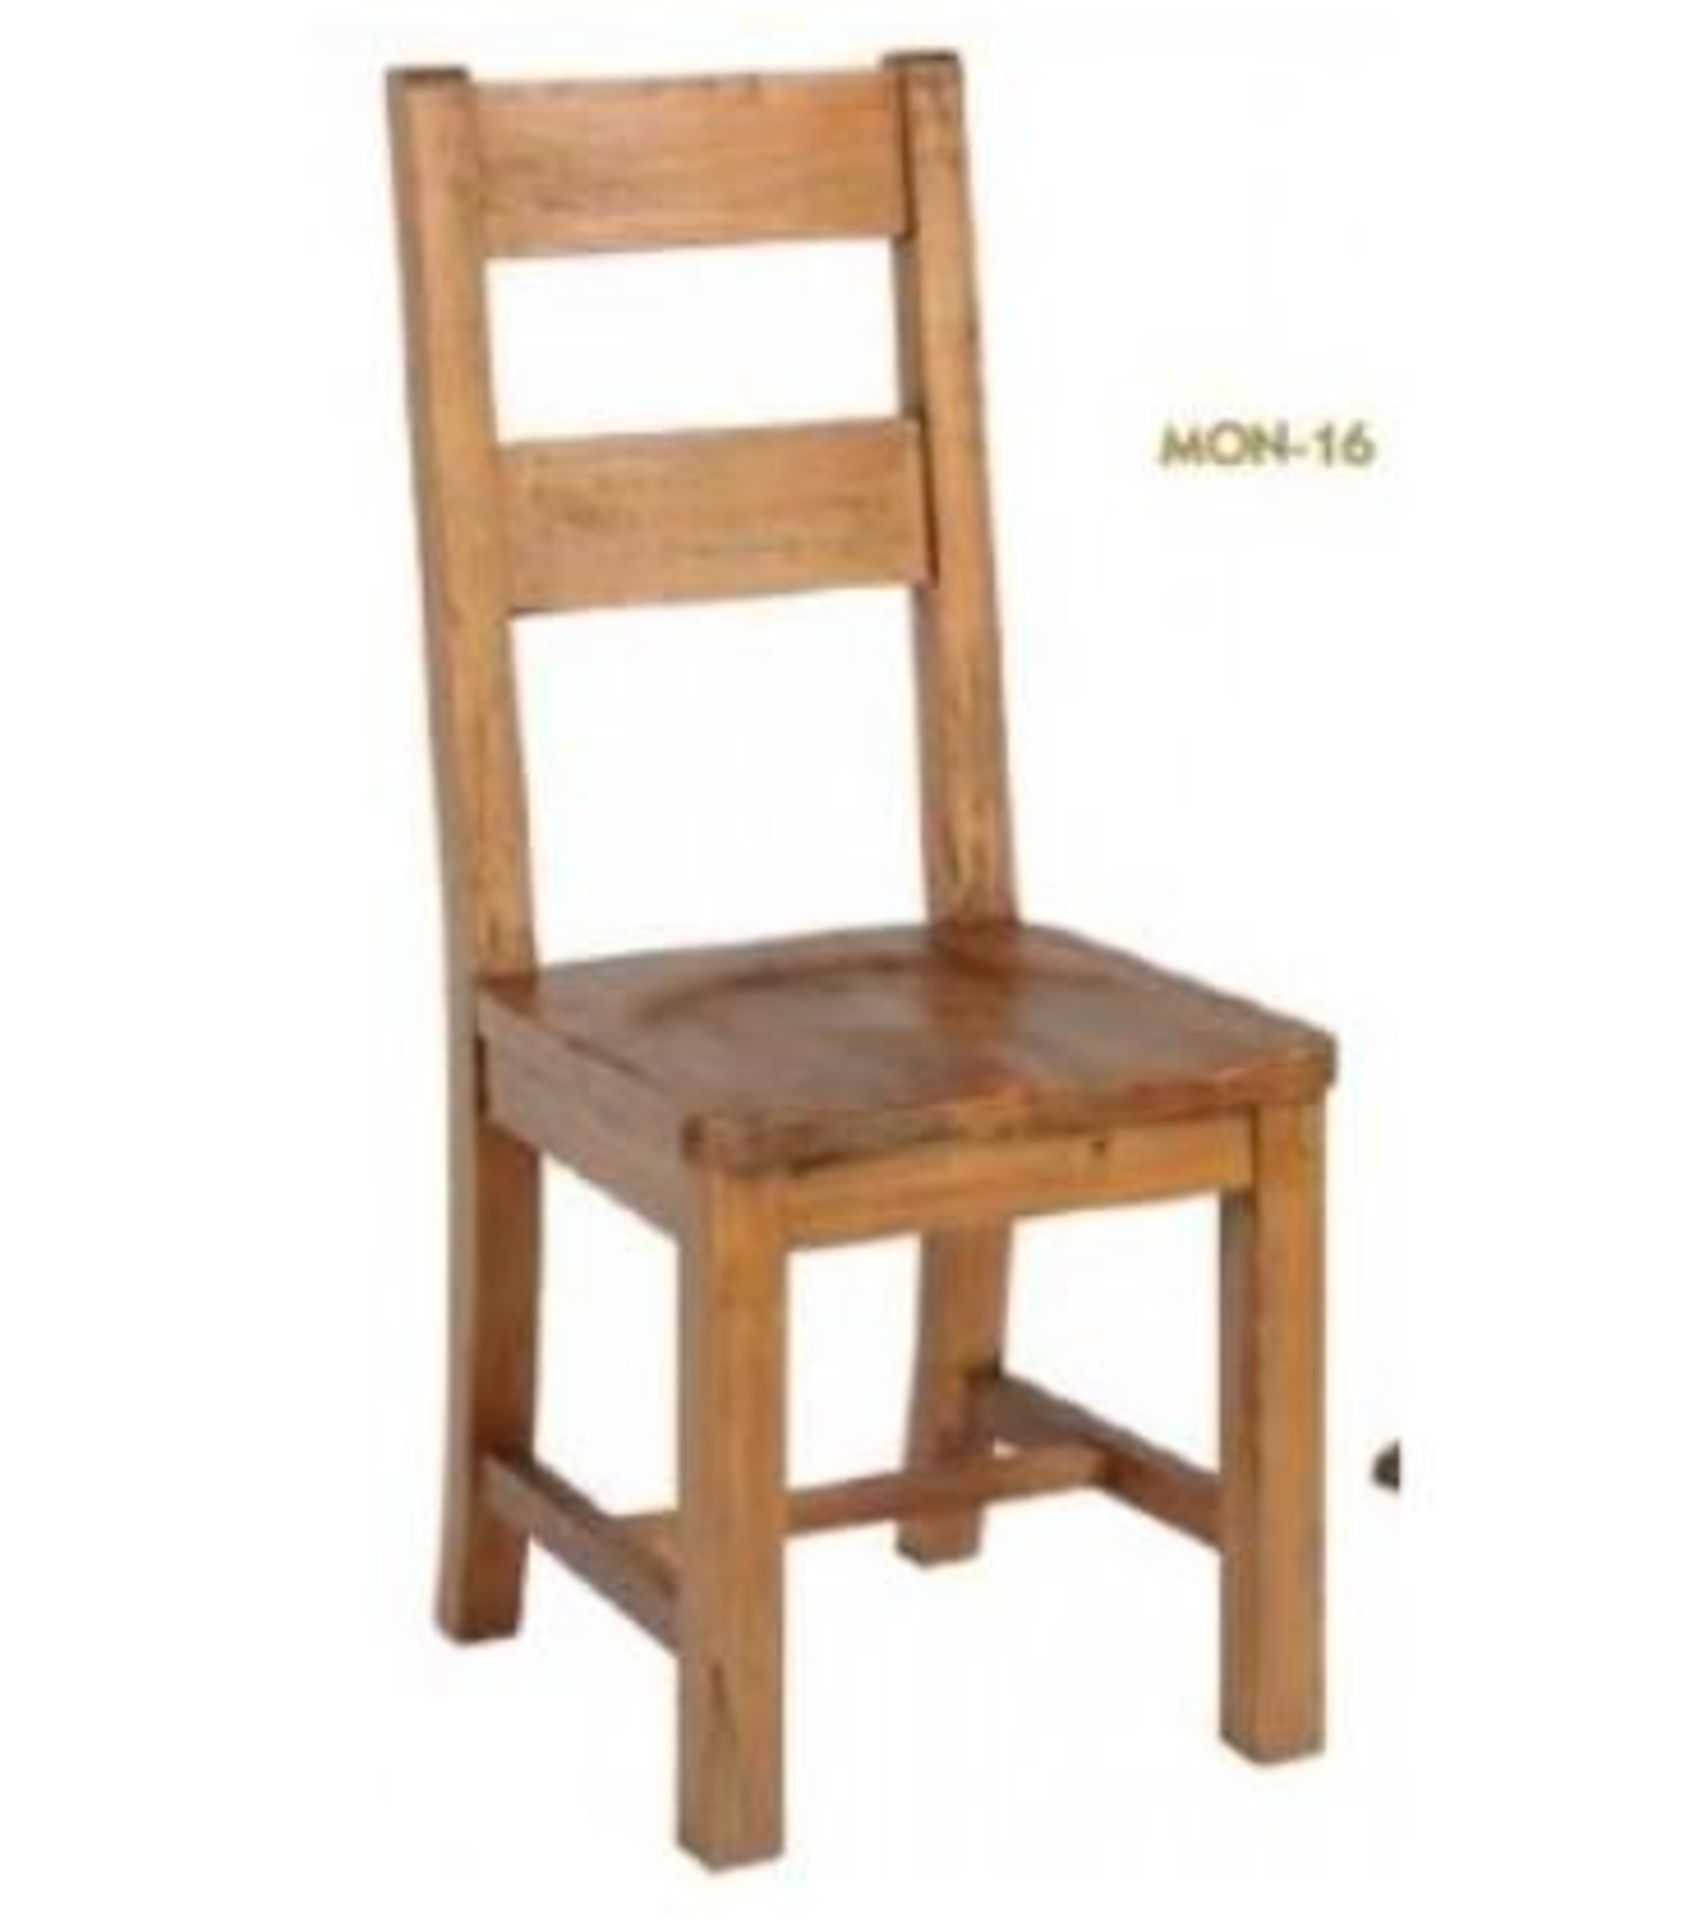 BRAND NEW & BOXED TRADE LOT - 2 X Montana Dining chair